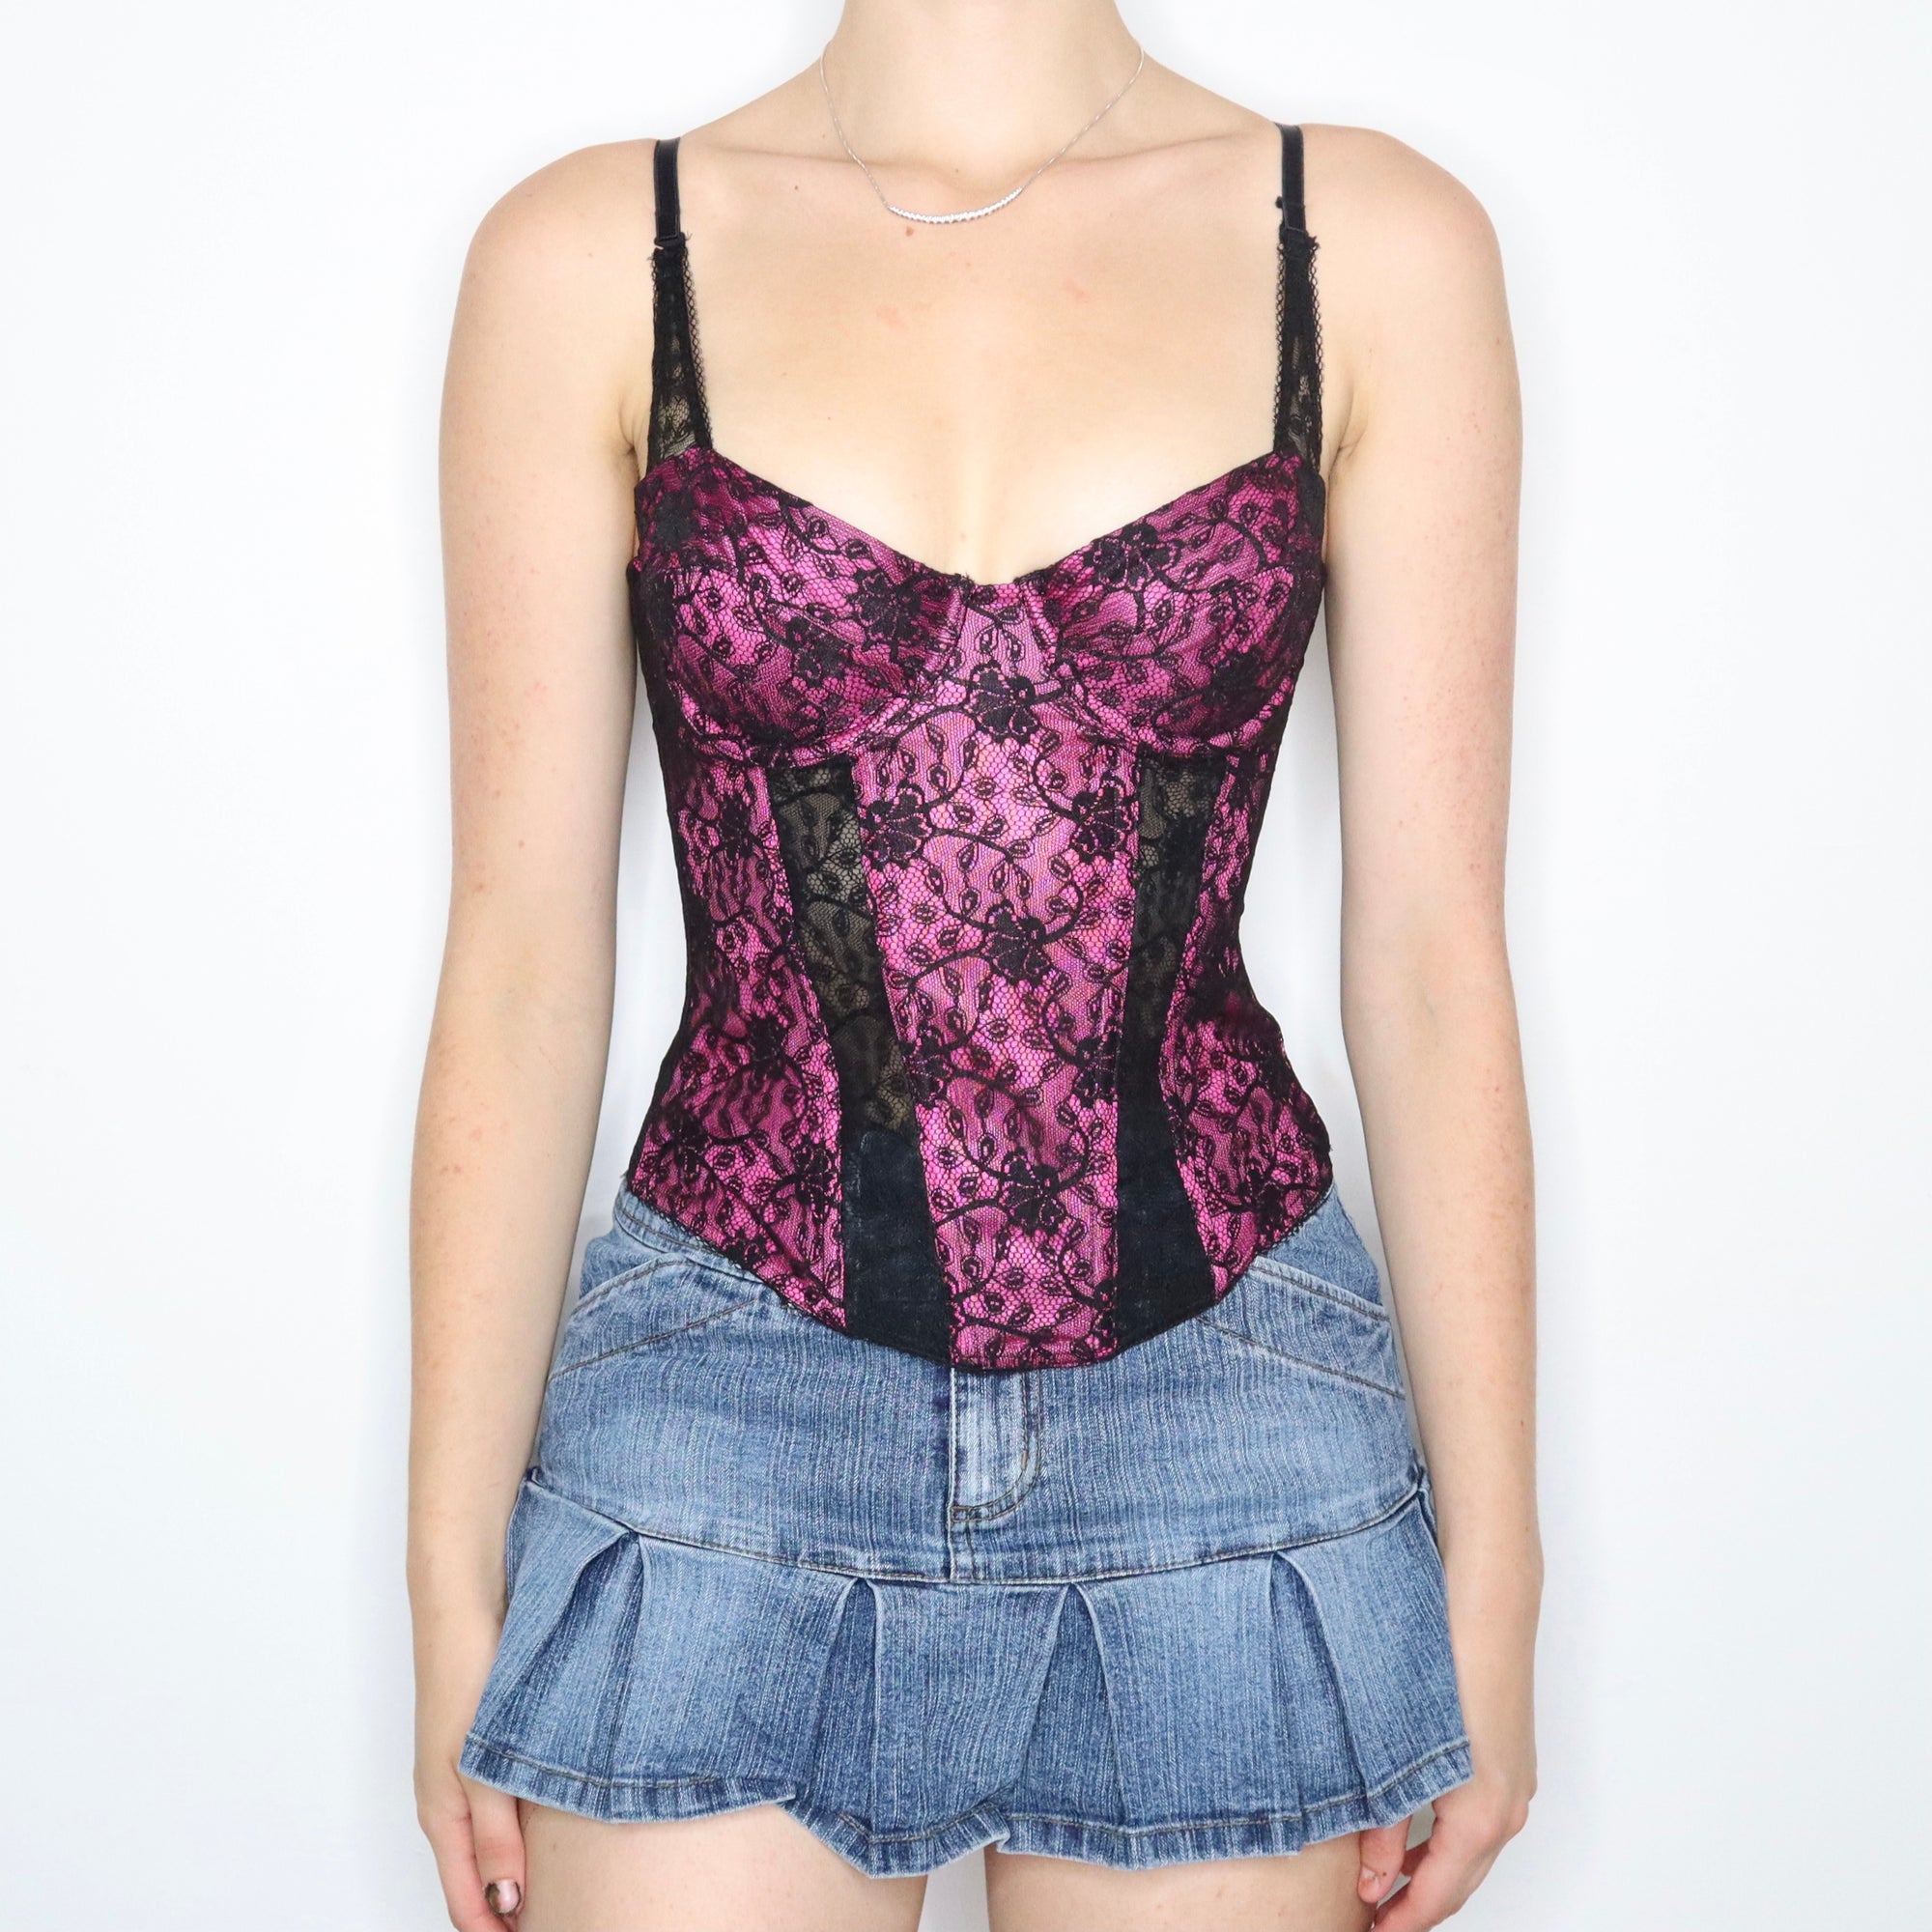 Mall Goth Lace Bustier